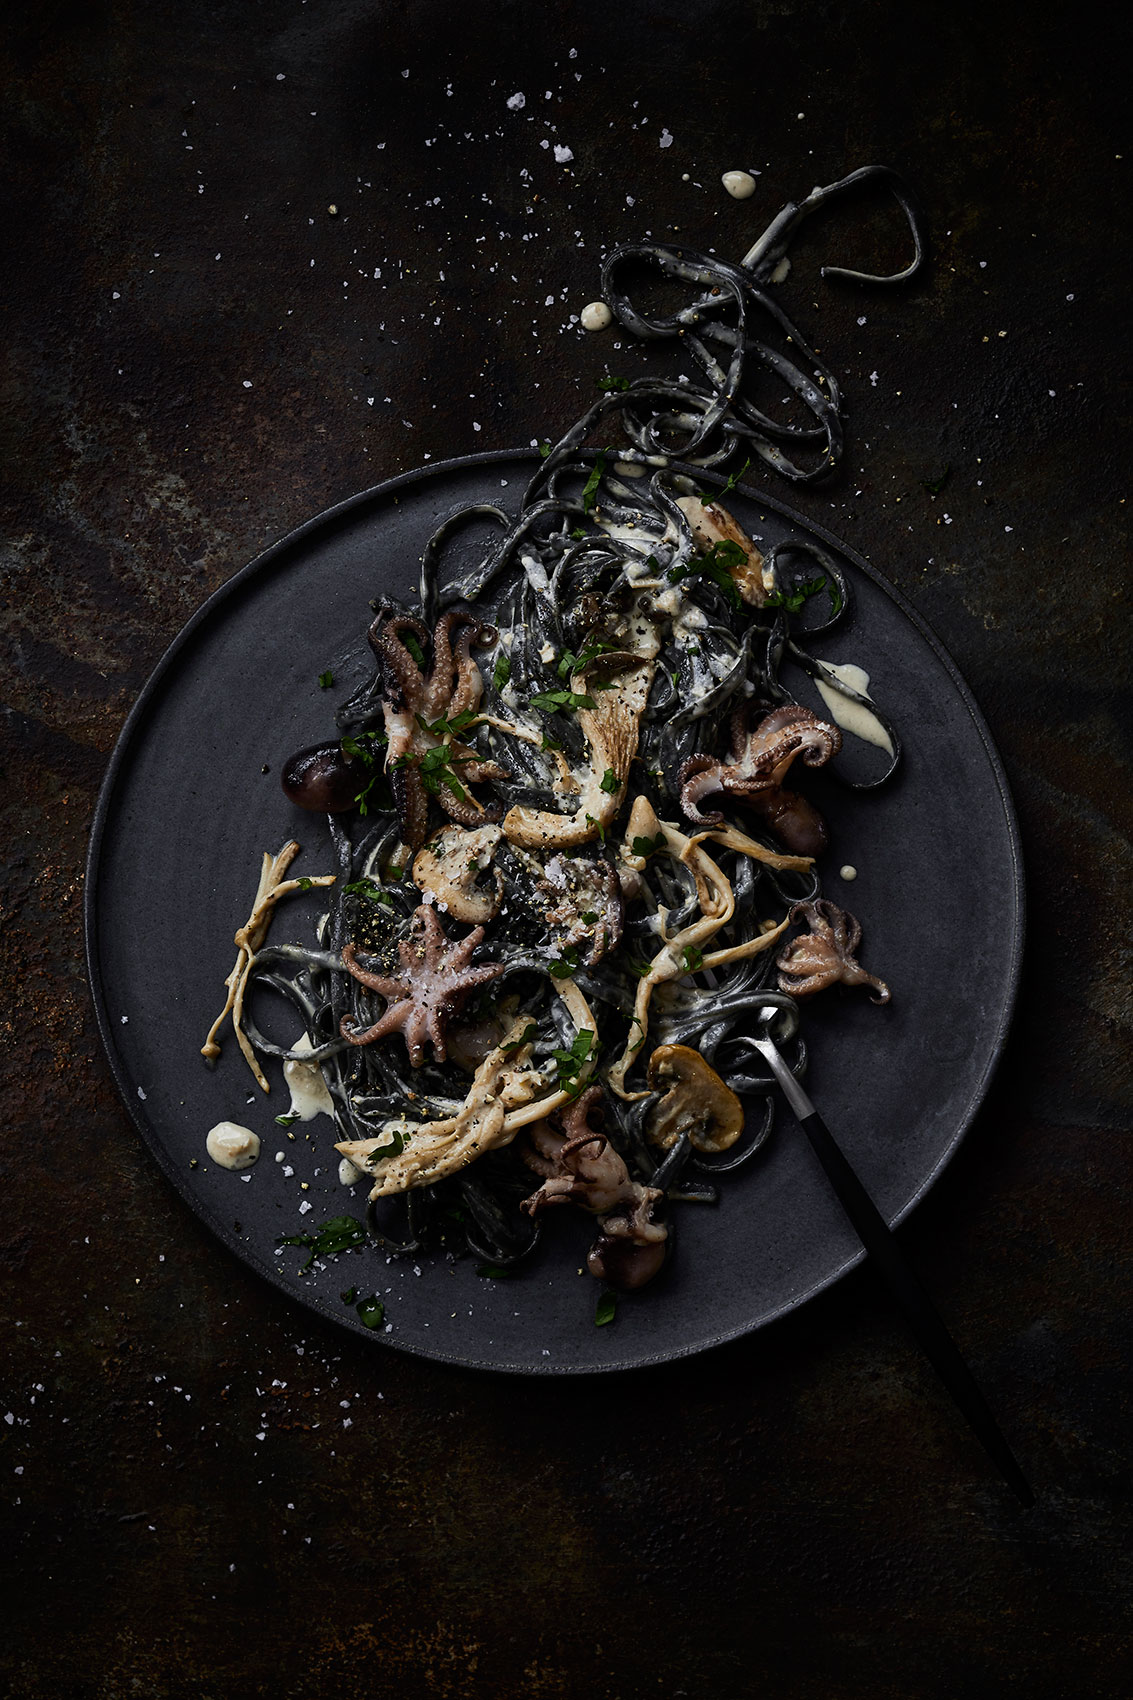 Maternal Mental Health • Squid Ink Pasta on Dark Plate & Table • Advertising & Editorial Food Photography